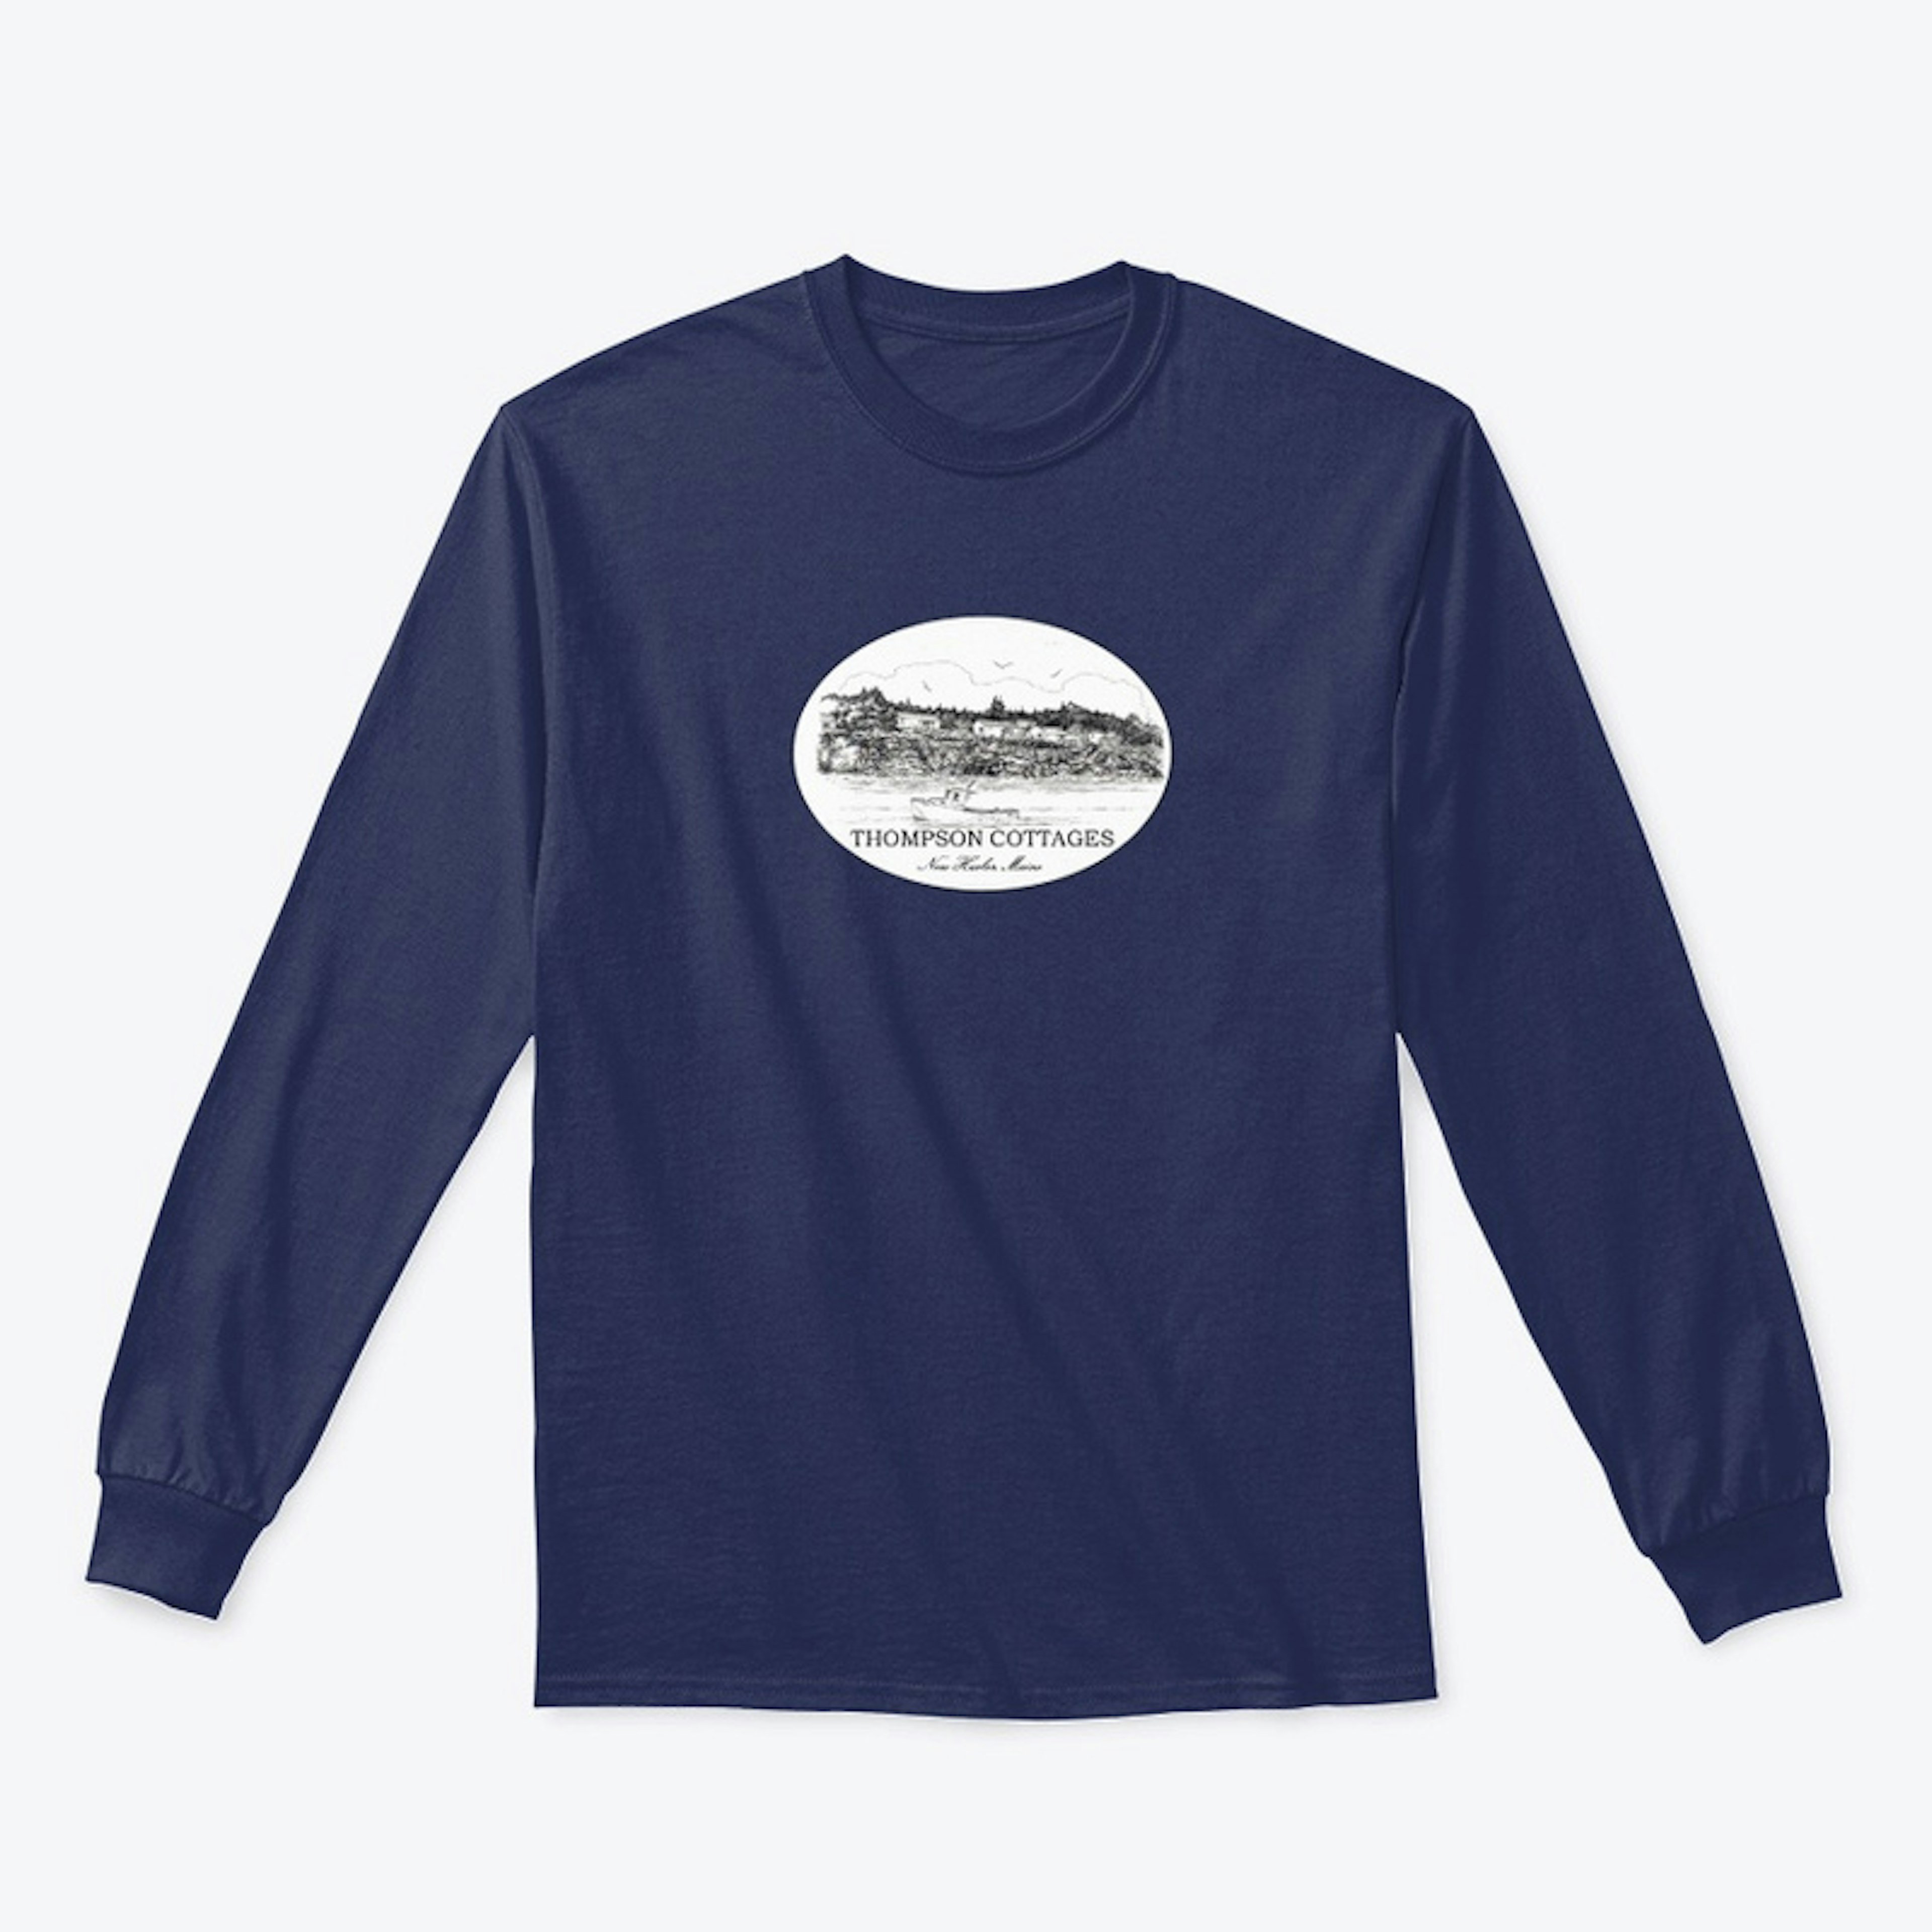 Thompson Cottages Long-Sleeved Shirts